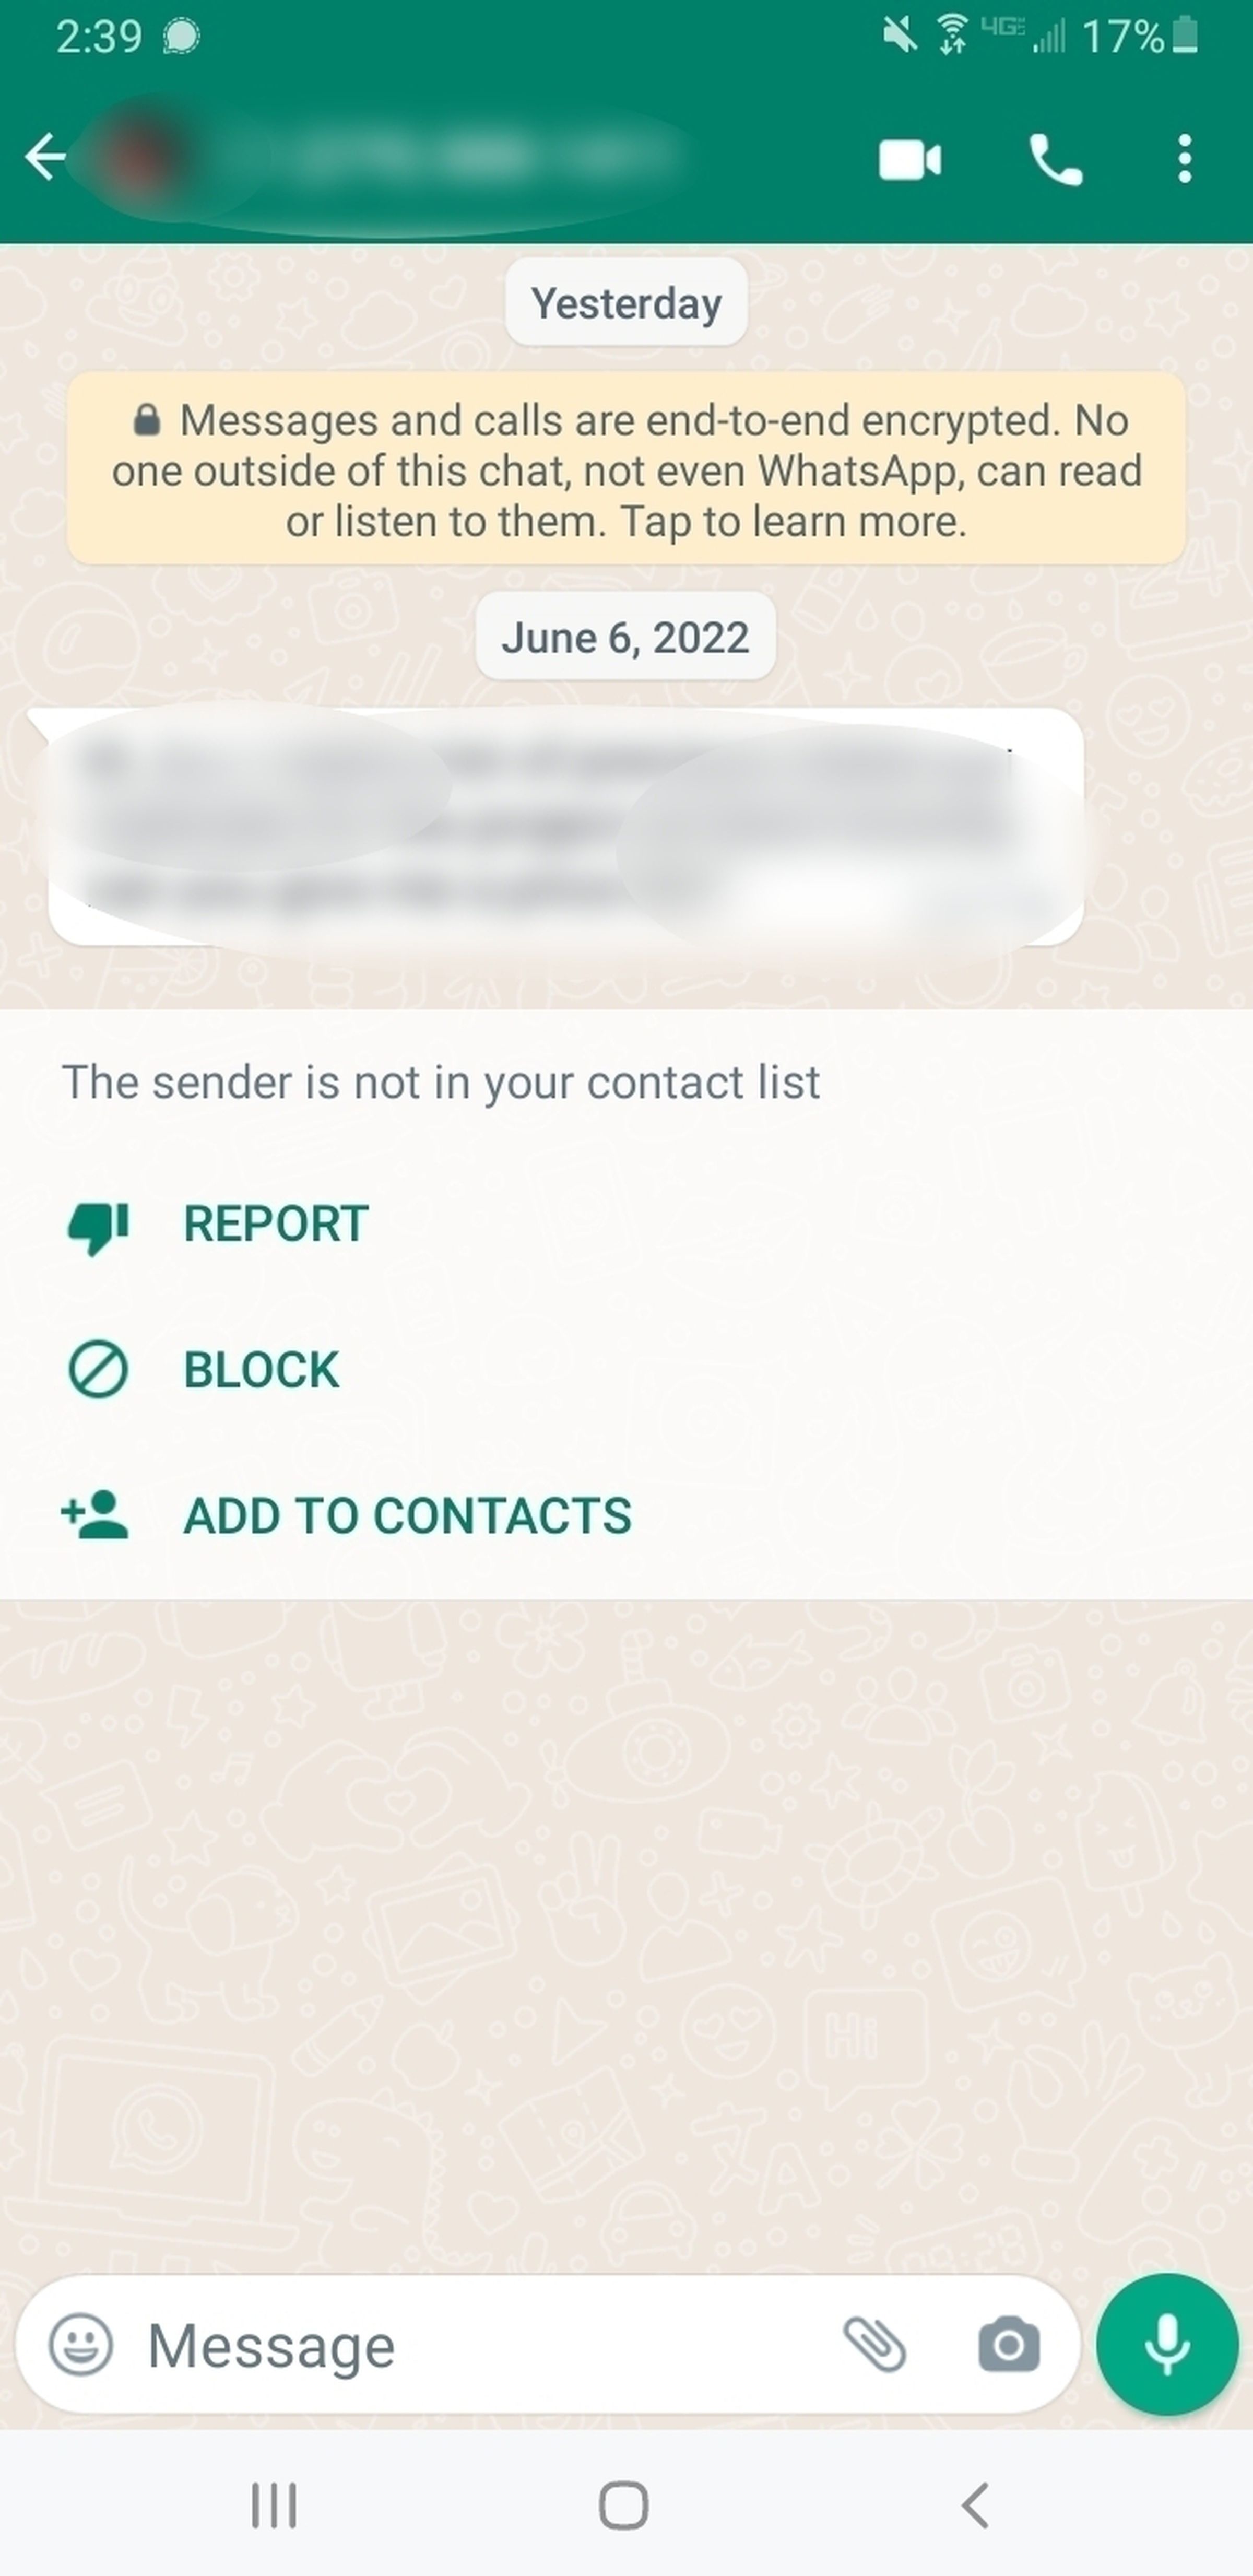 WhatsApp will warn you if you receive a message from someone not on your contacts list.